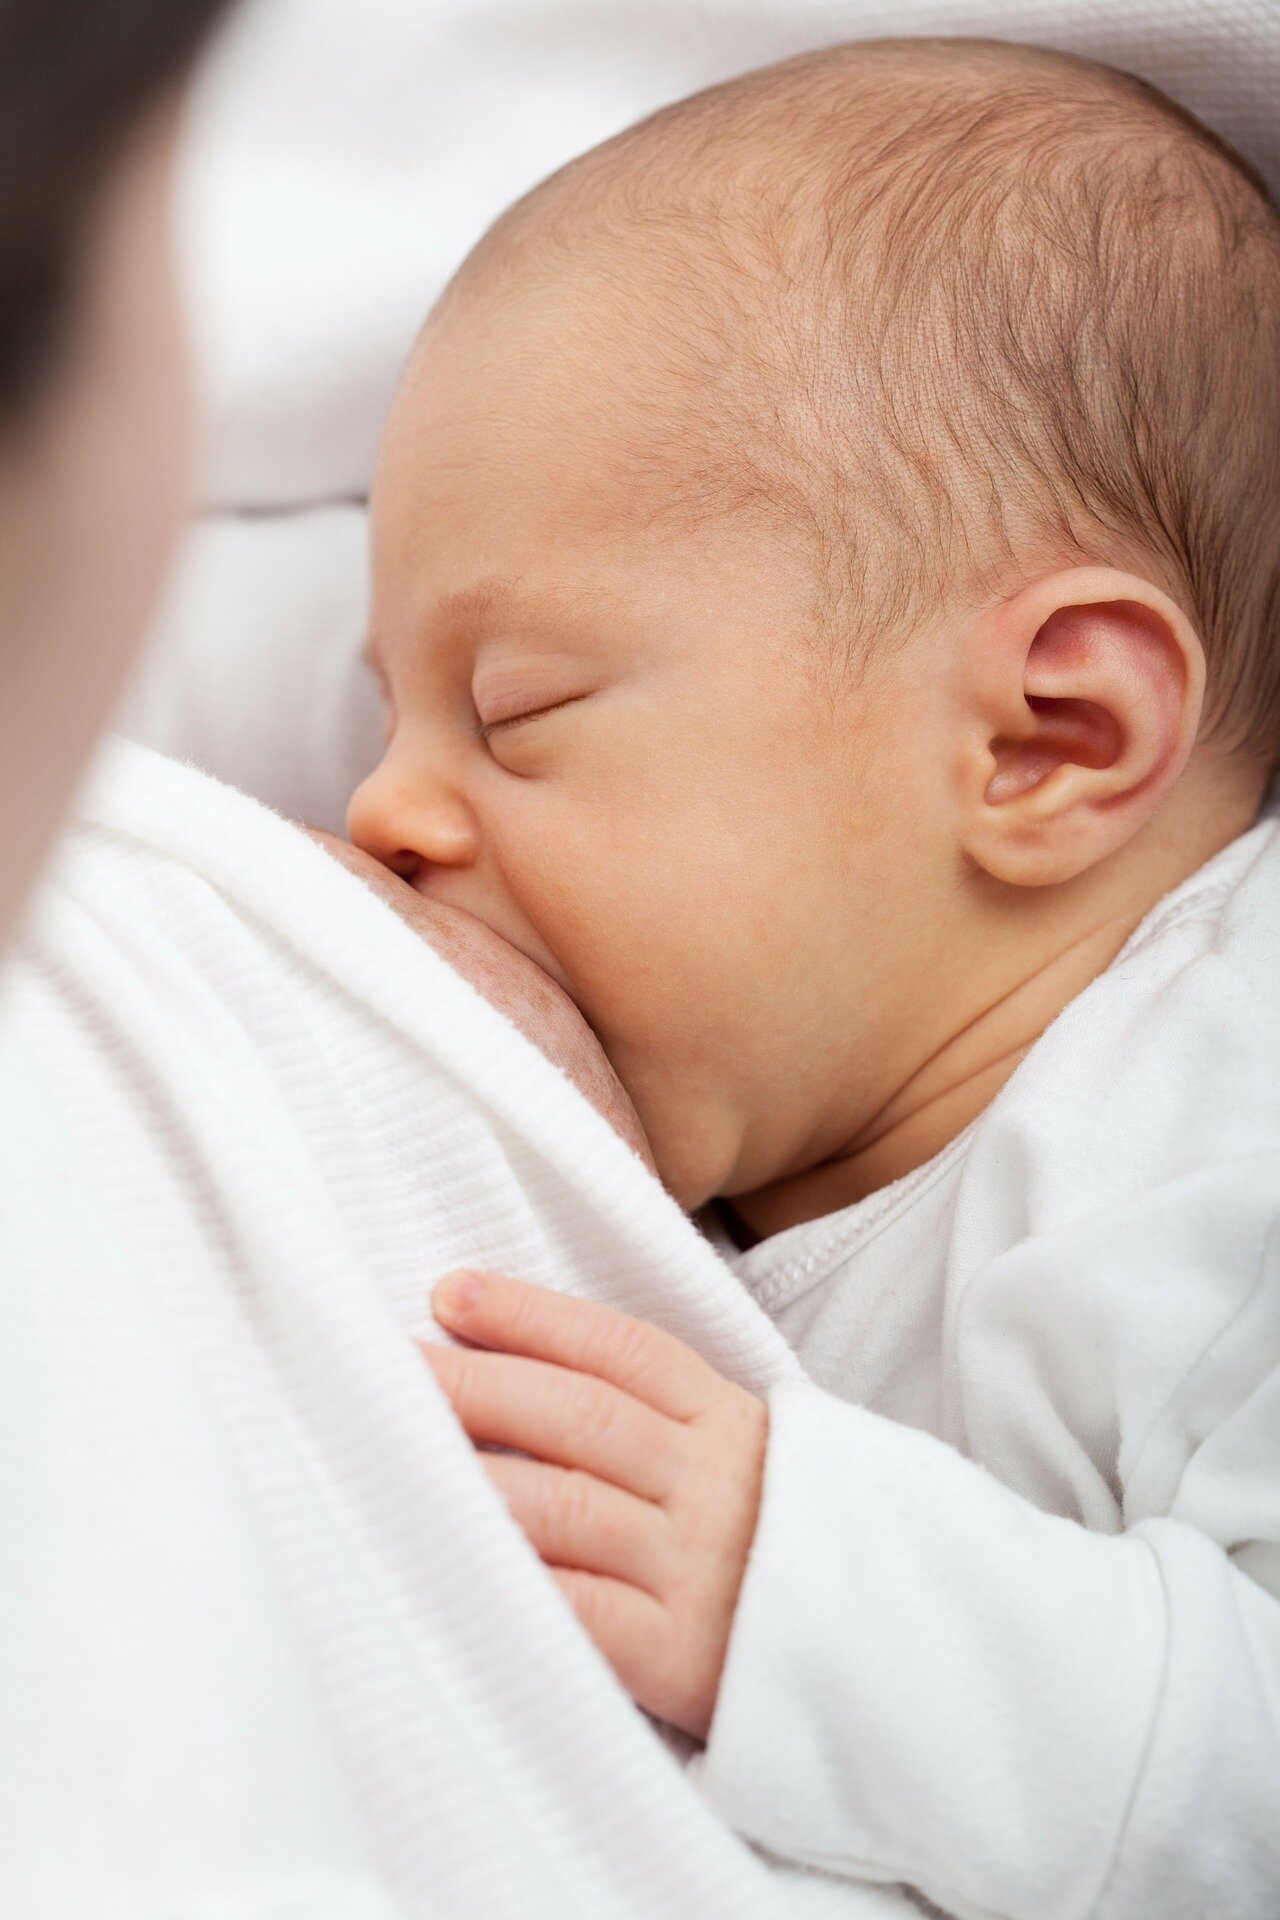 Certain proteins in breast milk found to be essential for a baby’s healthy gut